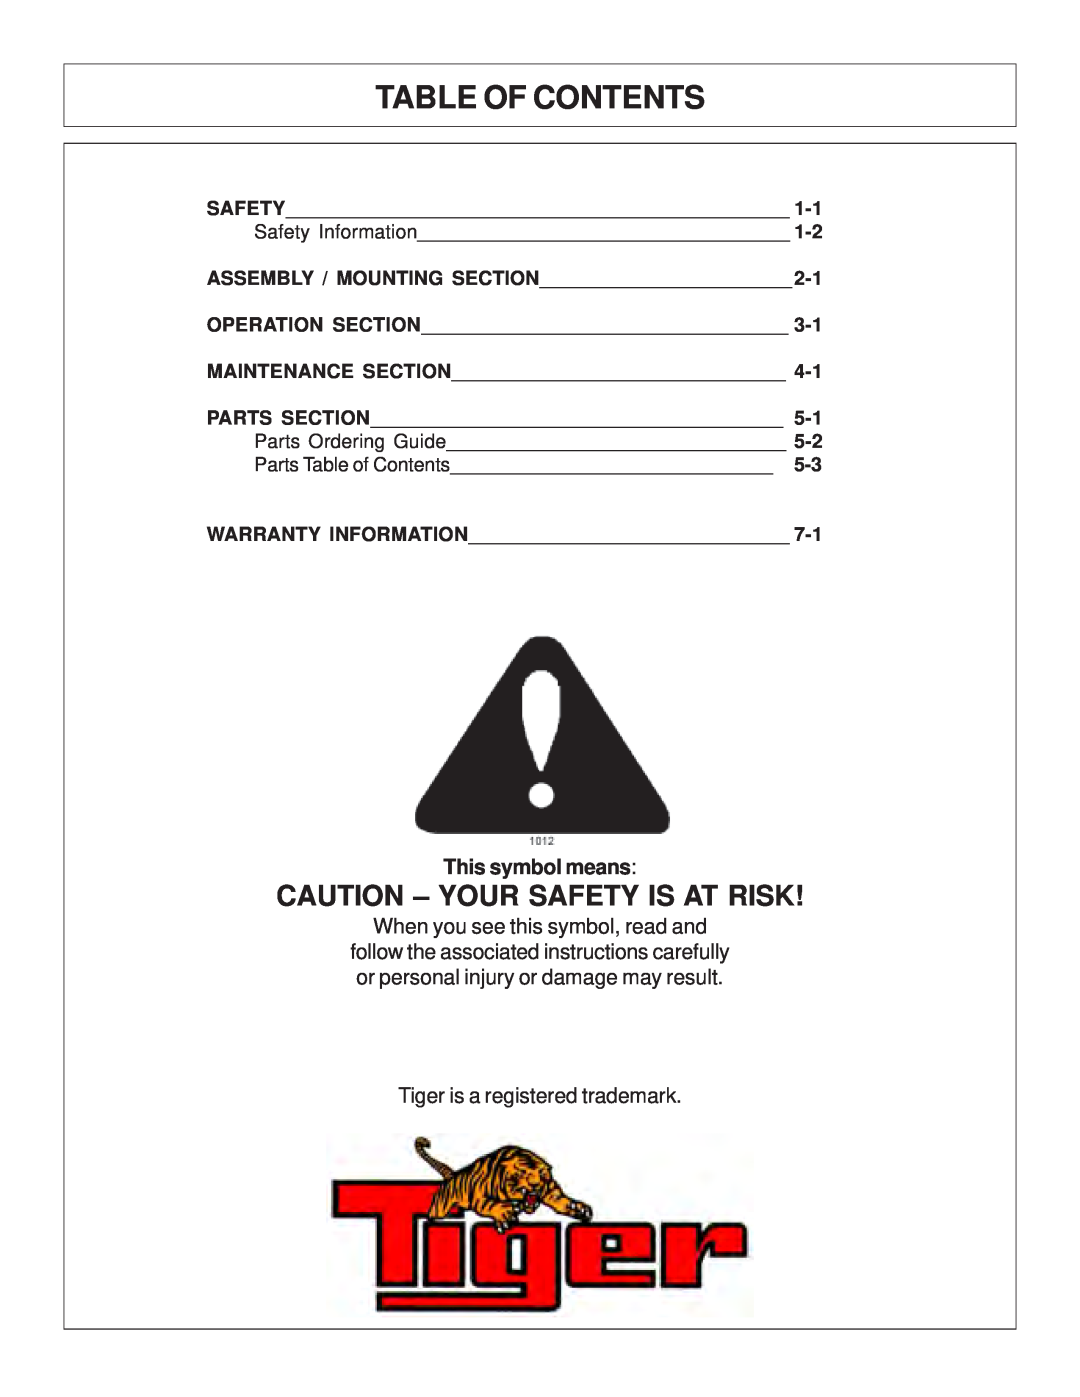 Tiger JD 5101E manual Table Of Contents, Caution - Your Safety Is At Risk, This symbol means, Assembly / Mounting Section 